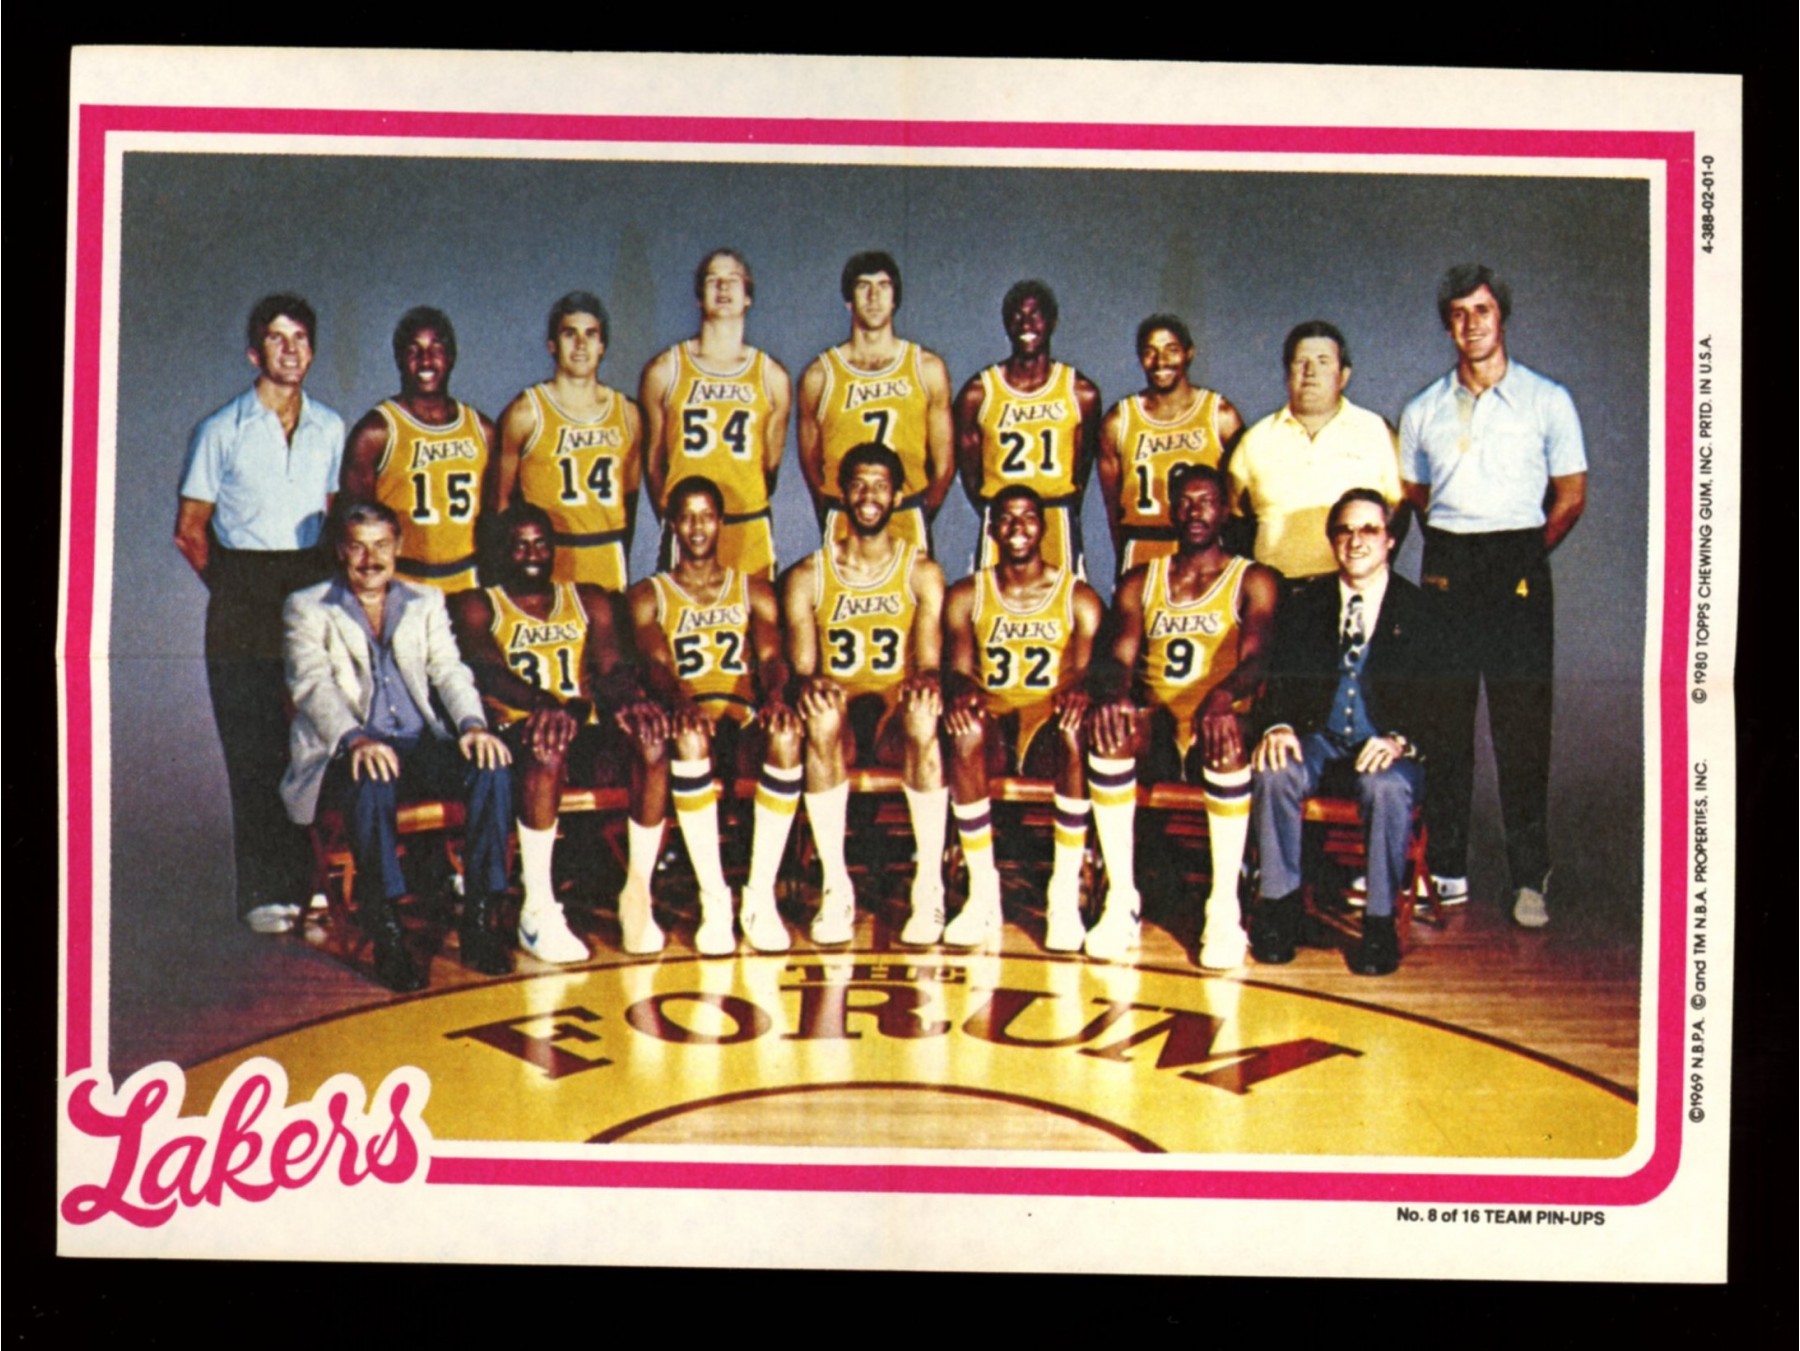 Sold at Auction: 1980 Topps Magic Johnson Rookie Allstar Card